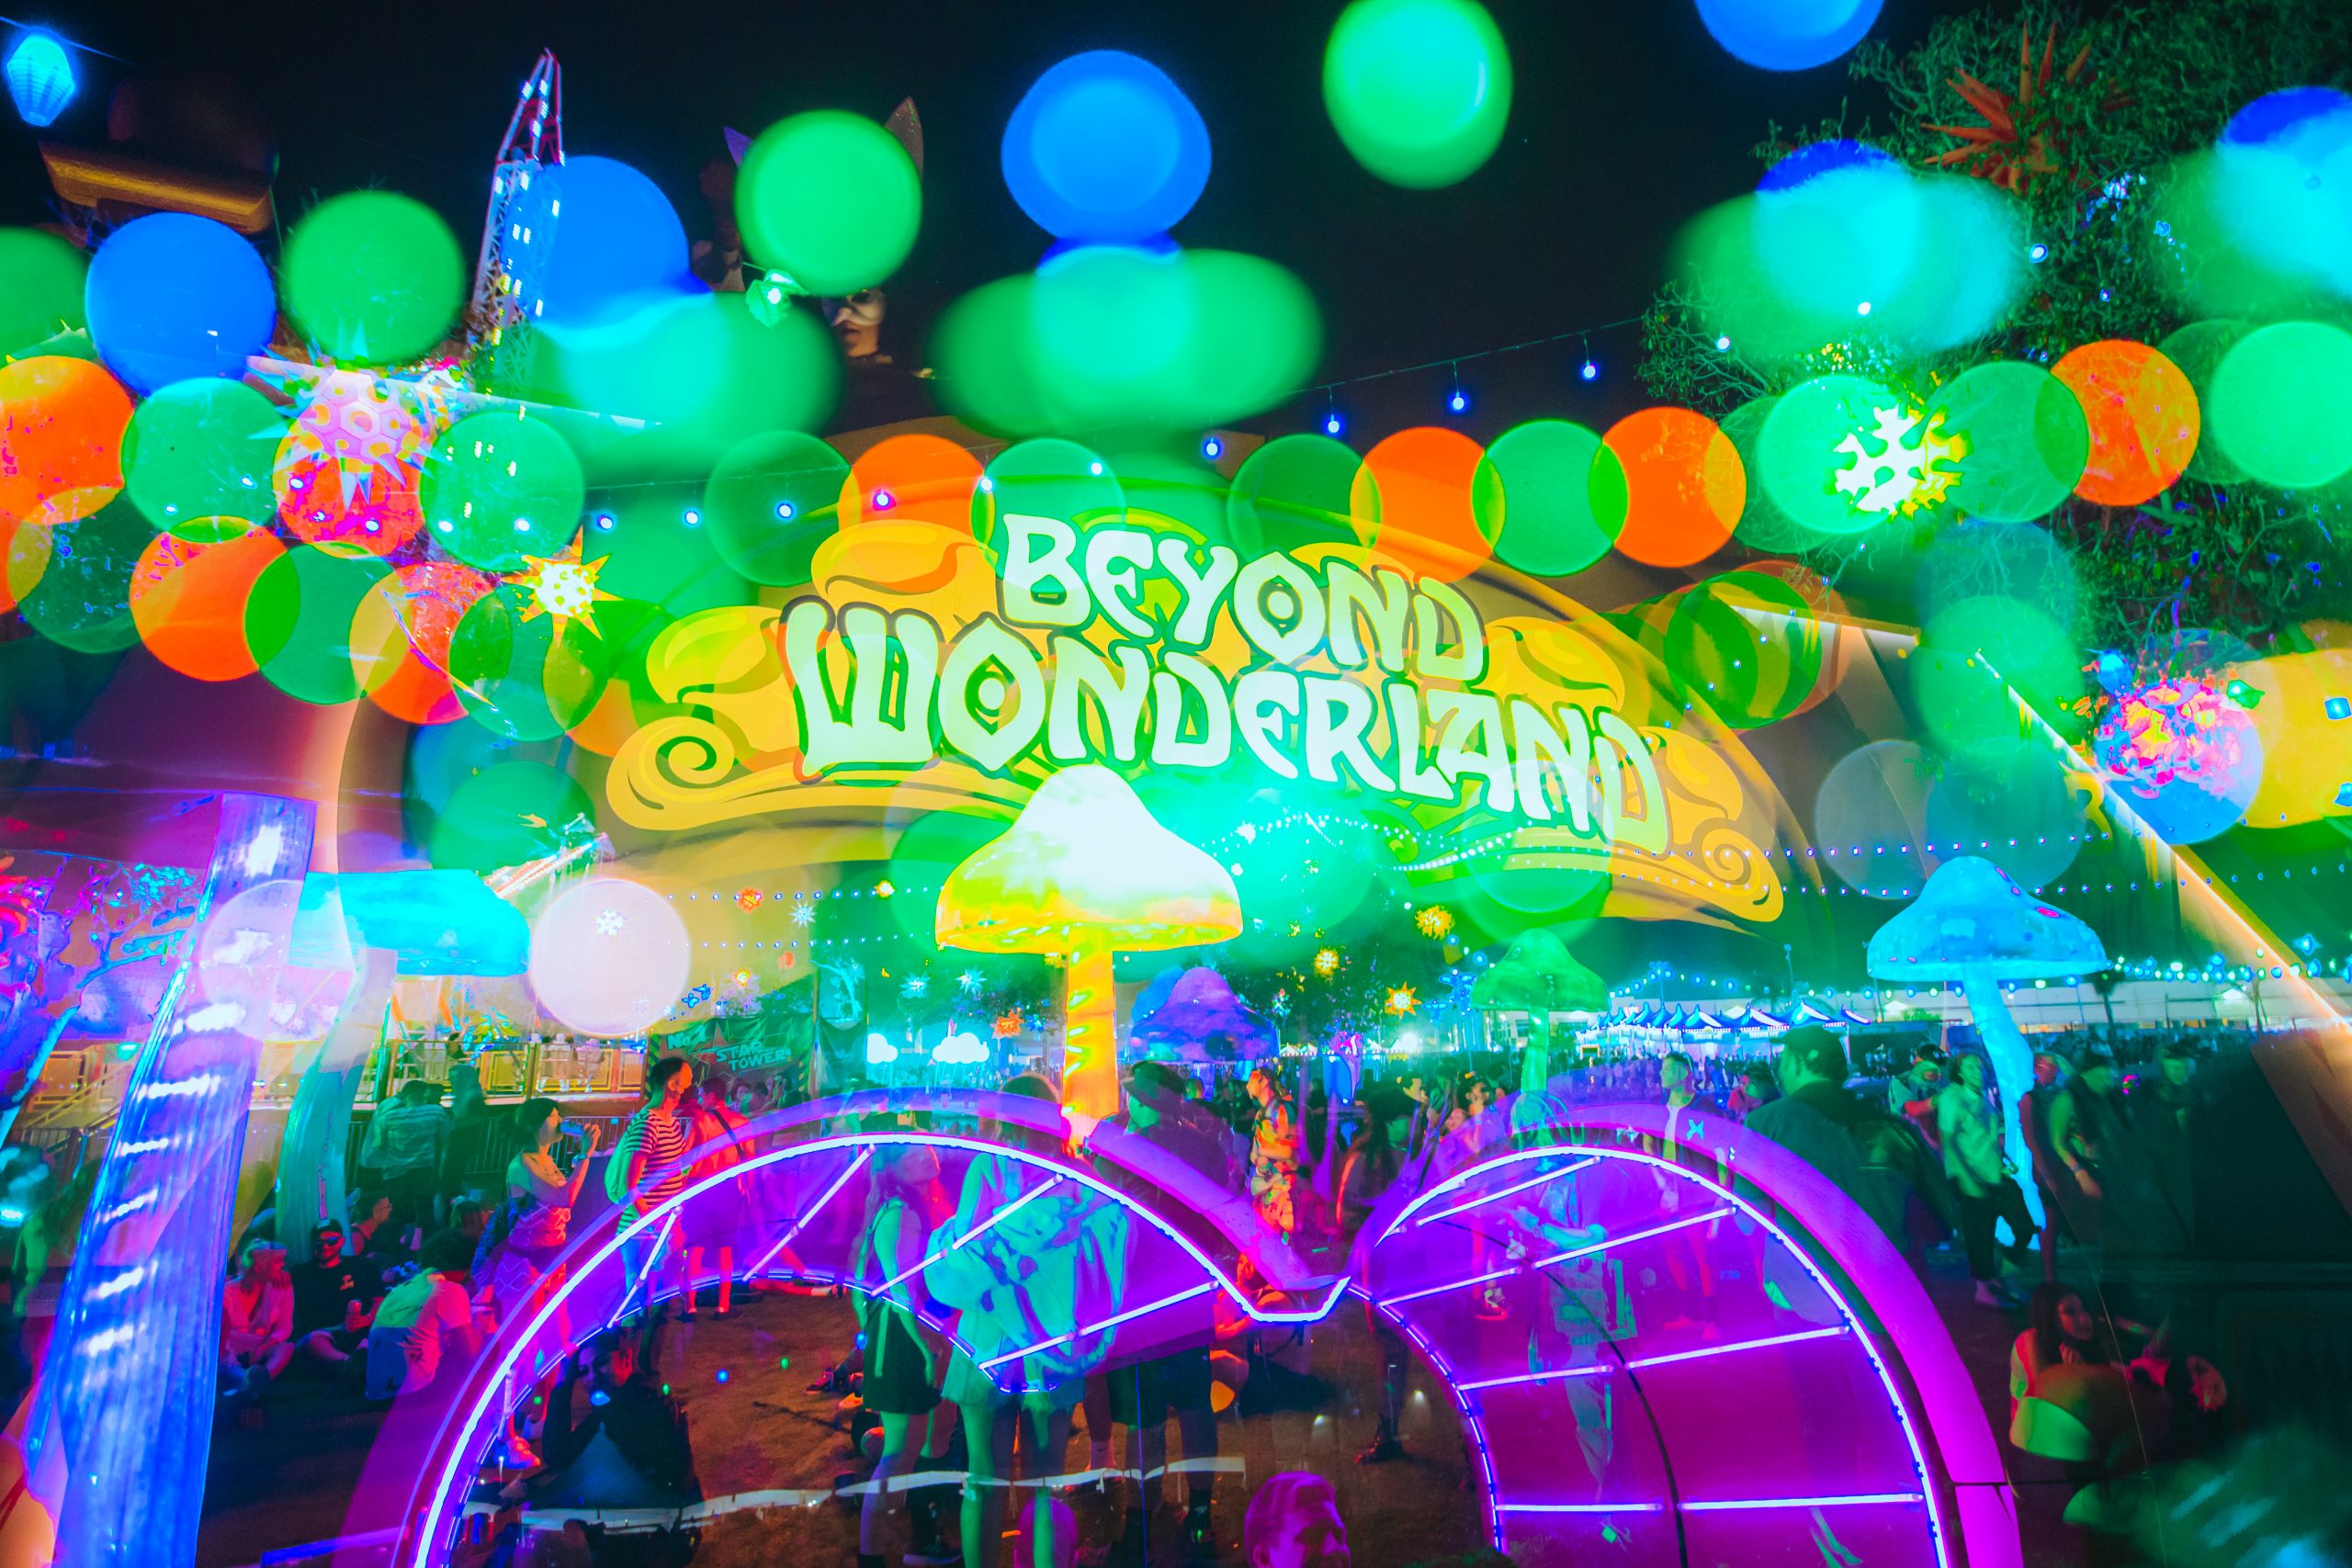 The Must-See Sets At Beyond Wonderland SoCal This March - EDMTunes